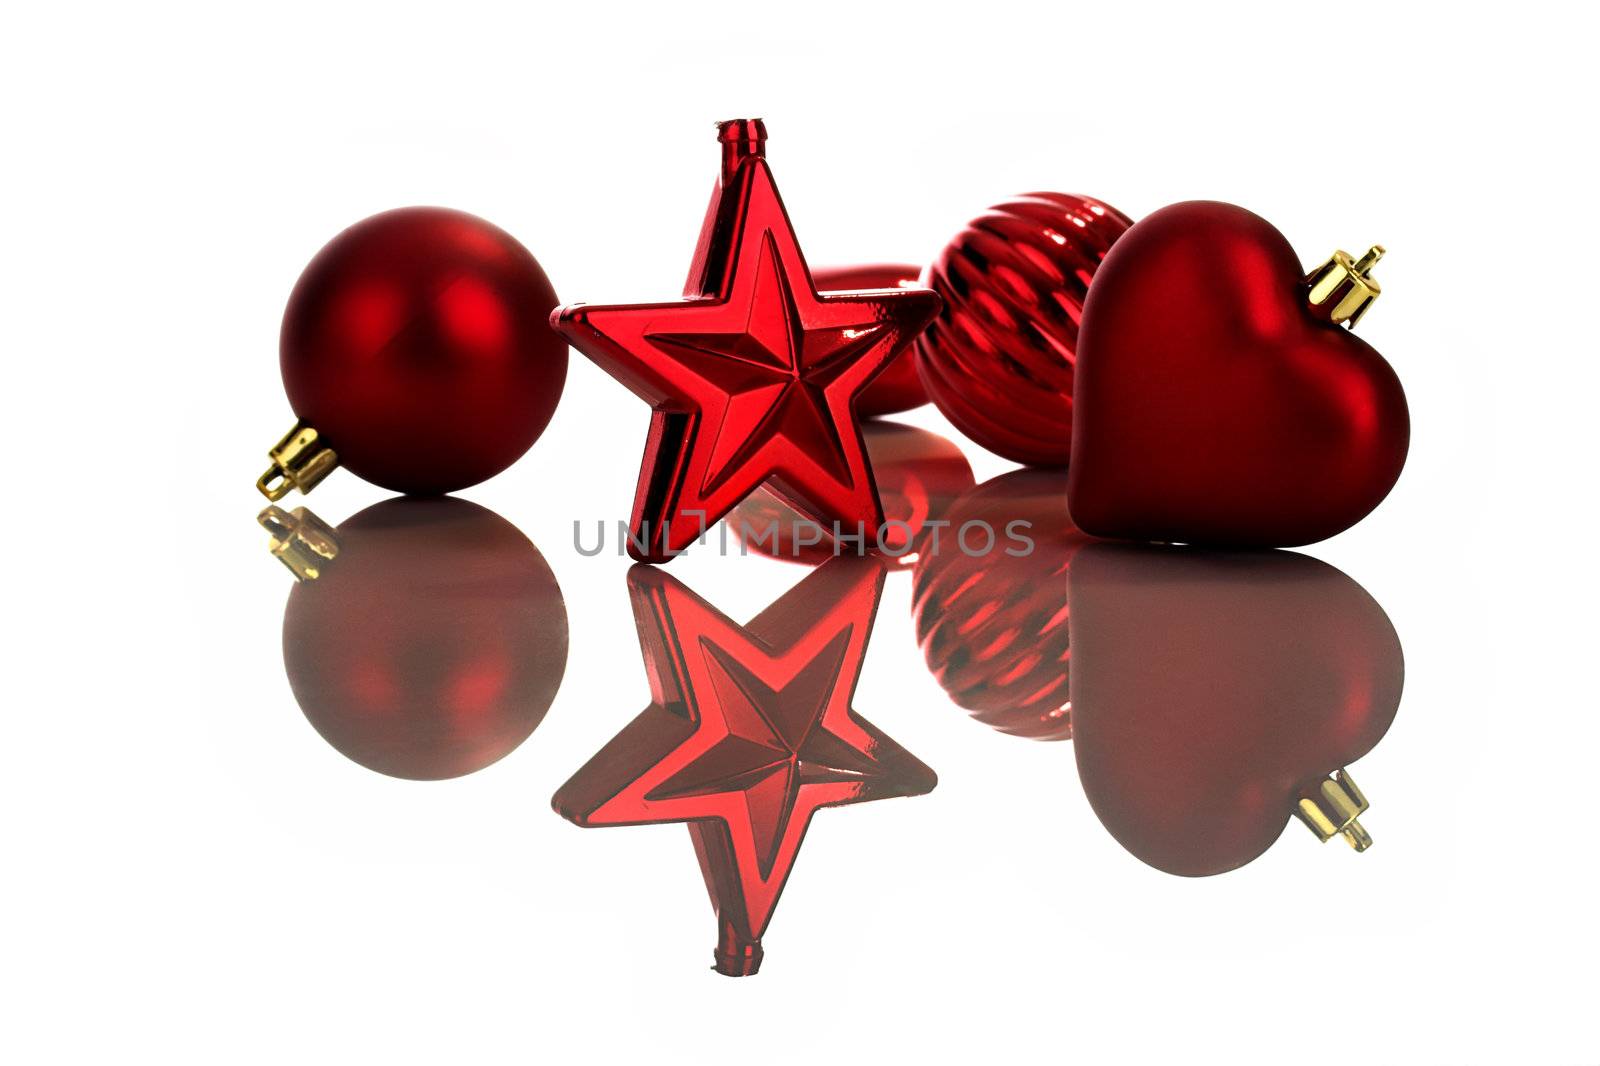 Red Christmas Ornaments by Iko